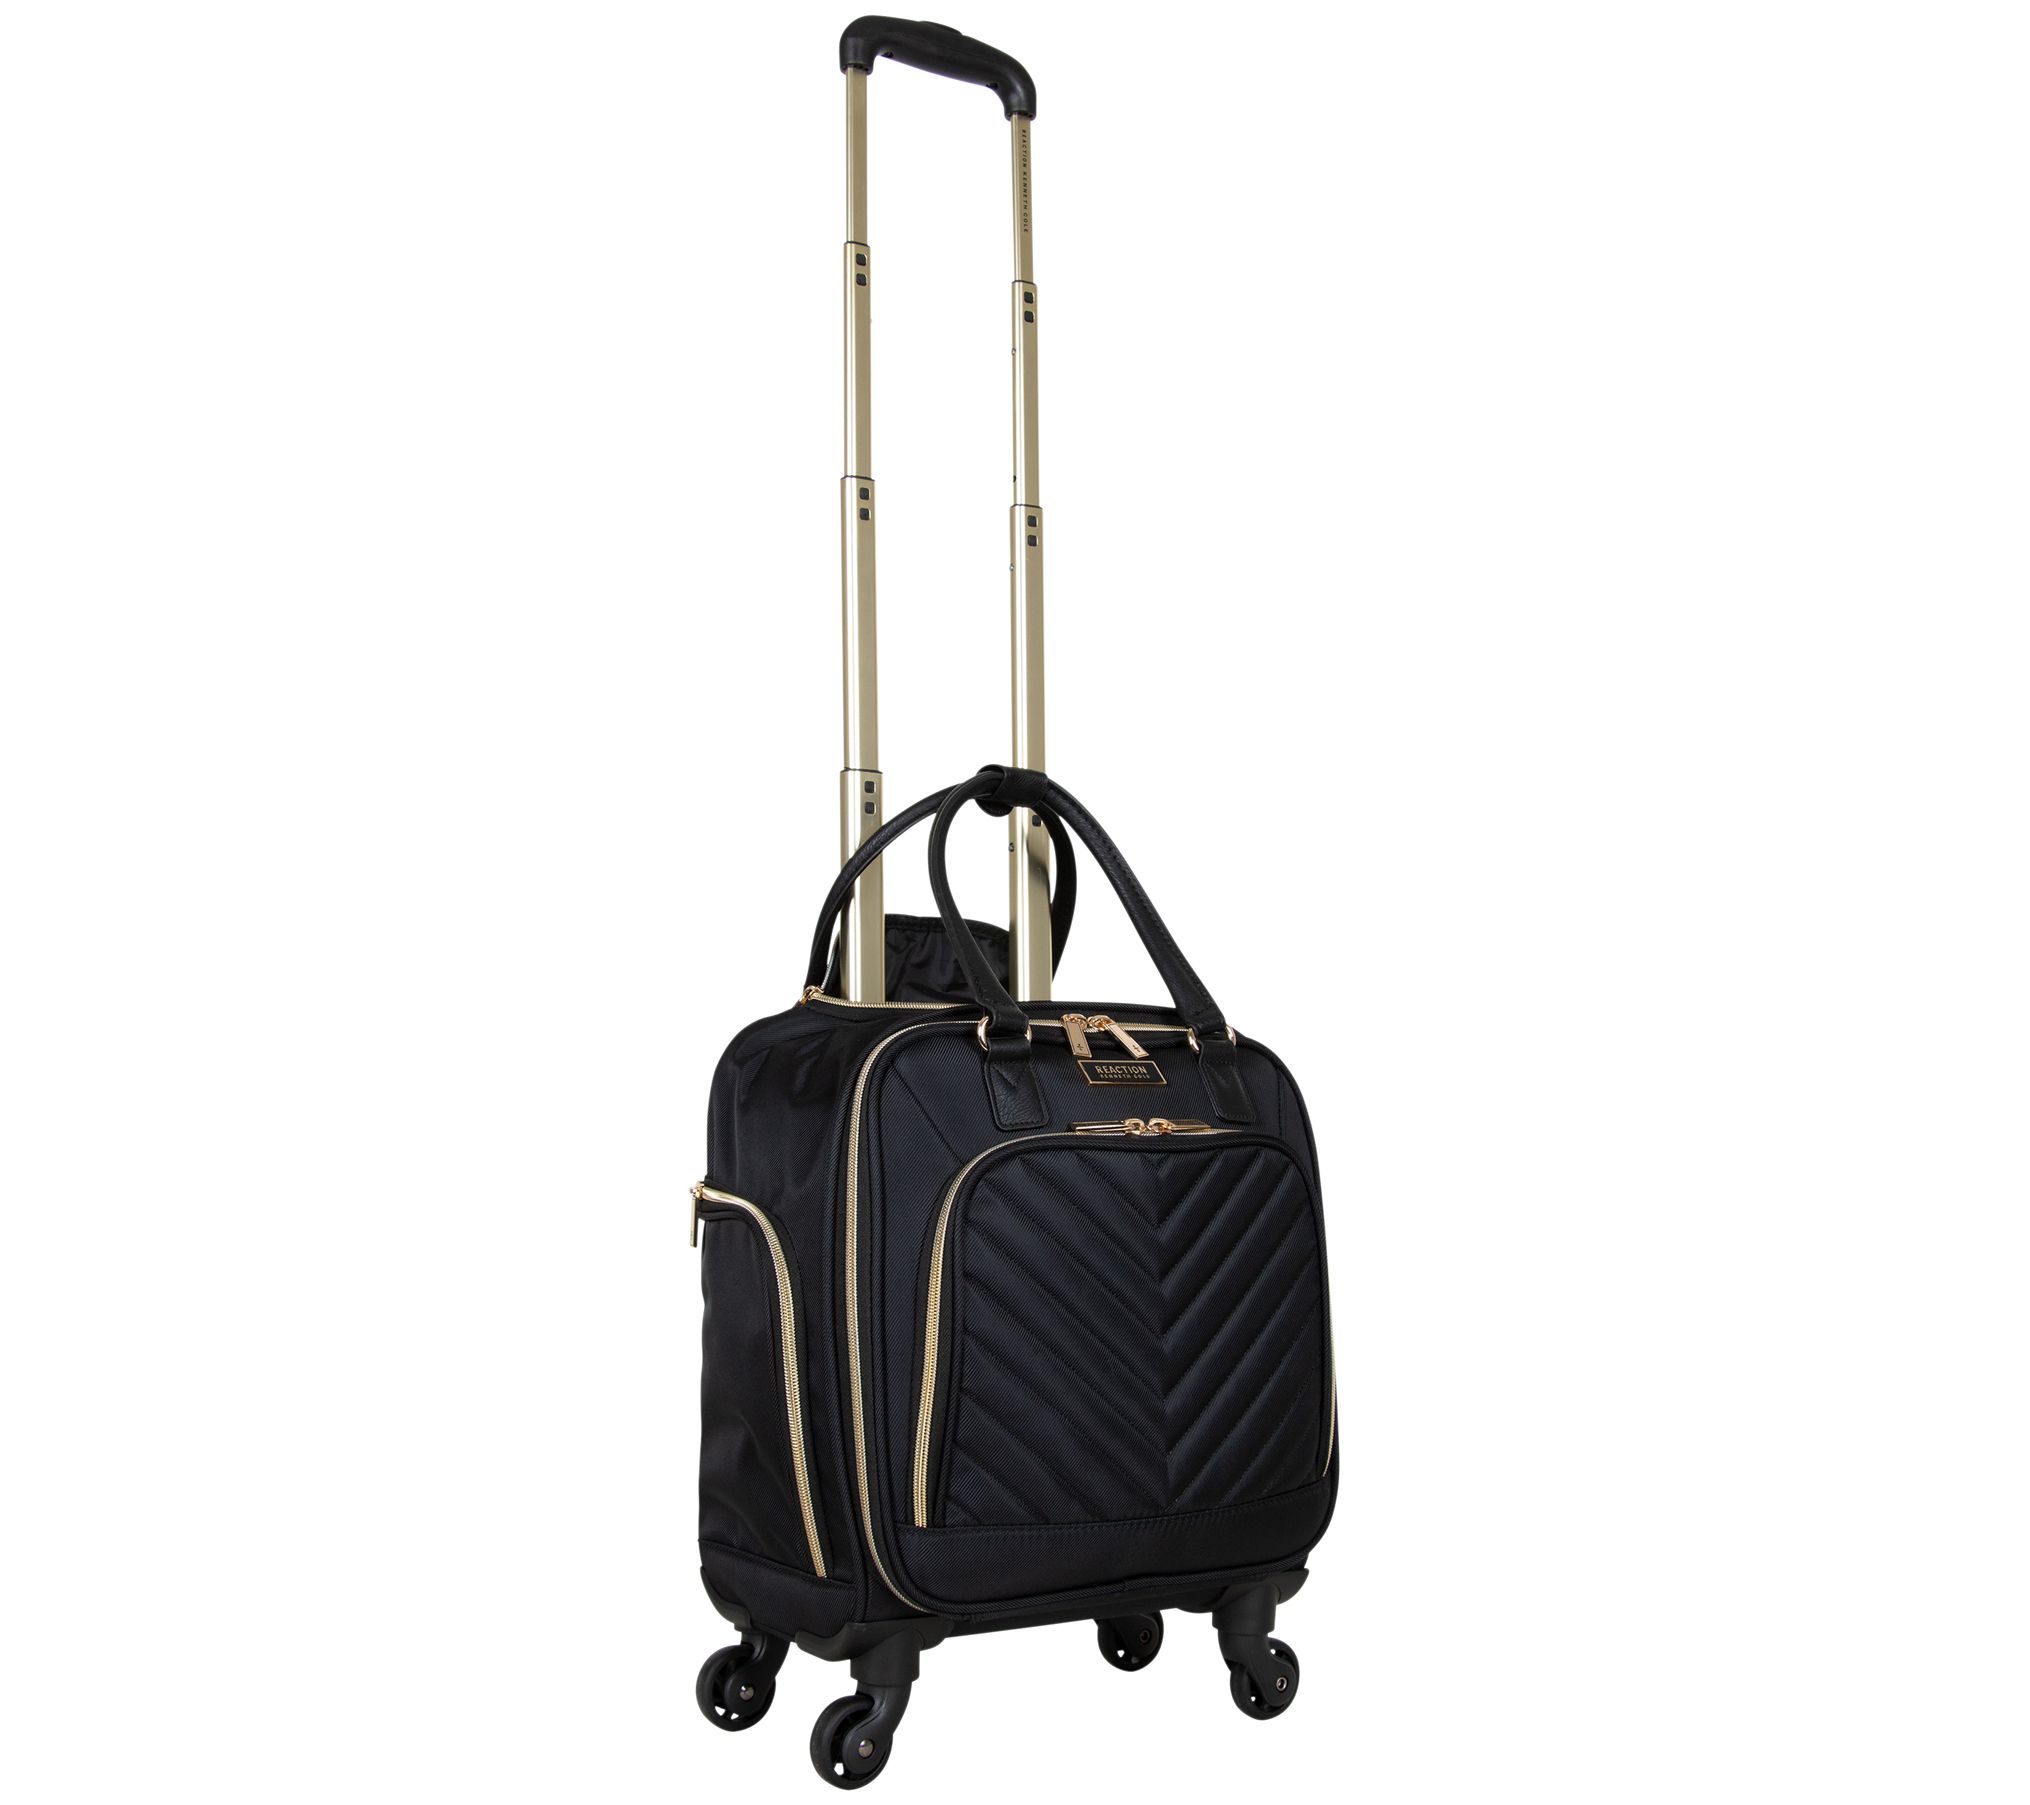 Kenneth Cole Reaction 17" Chelsea Carry-On Underseater Luggage - QVC.com